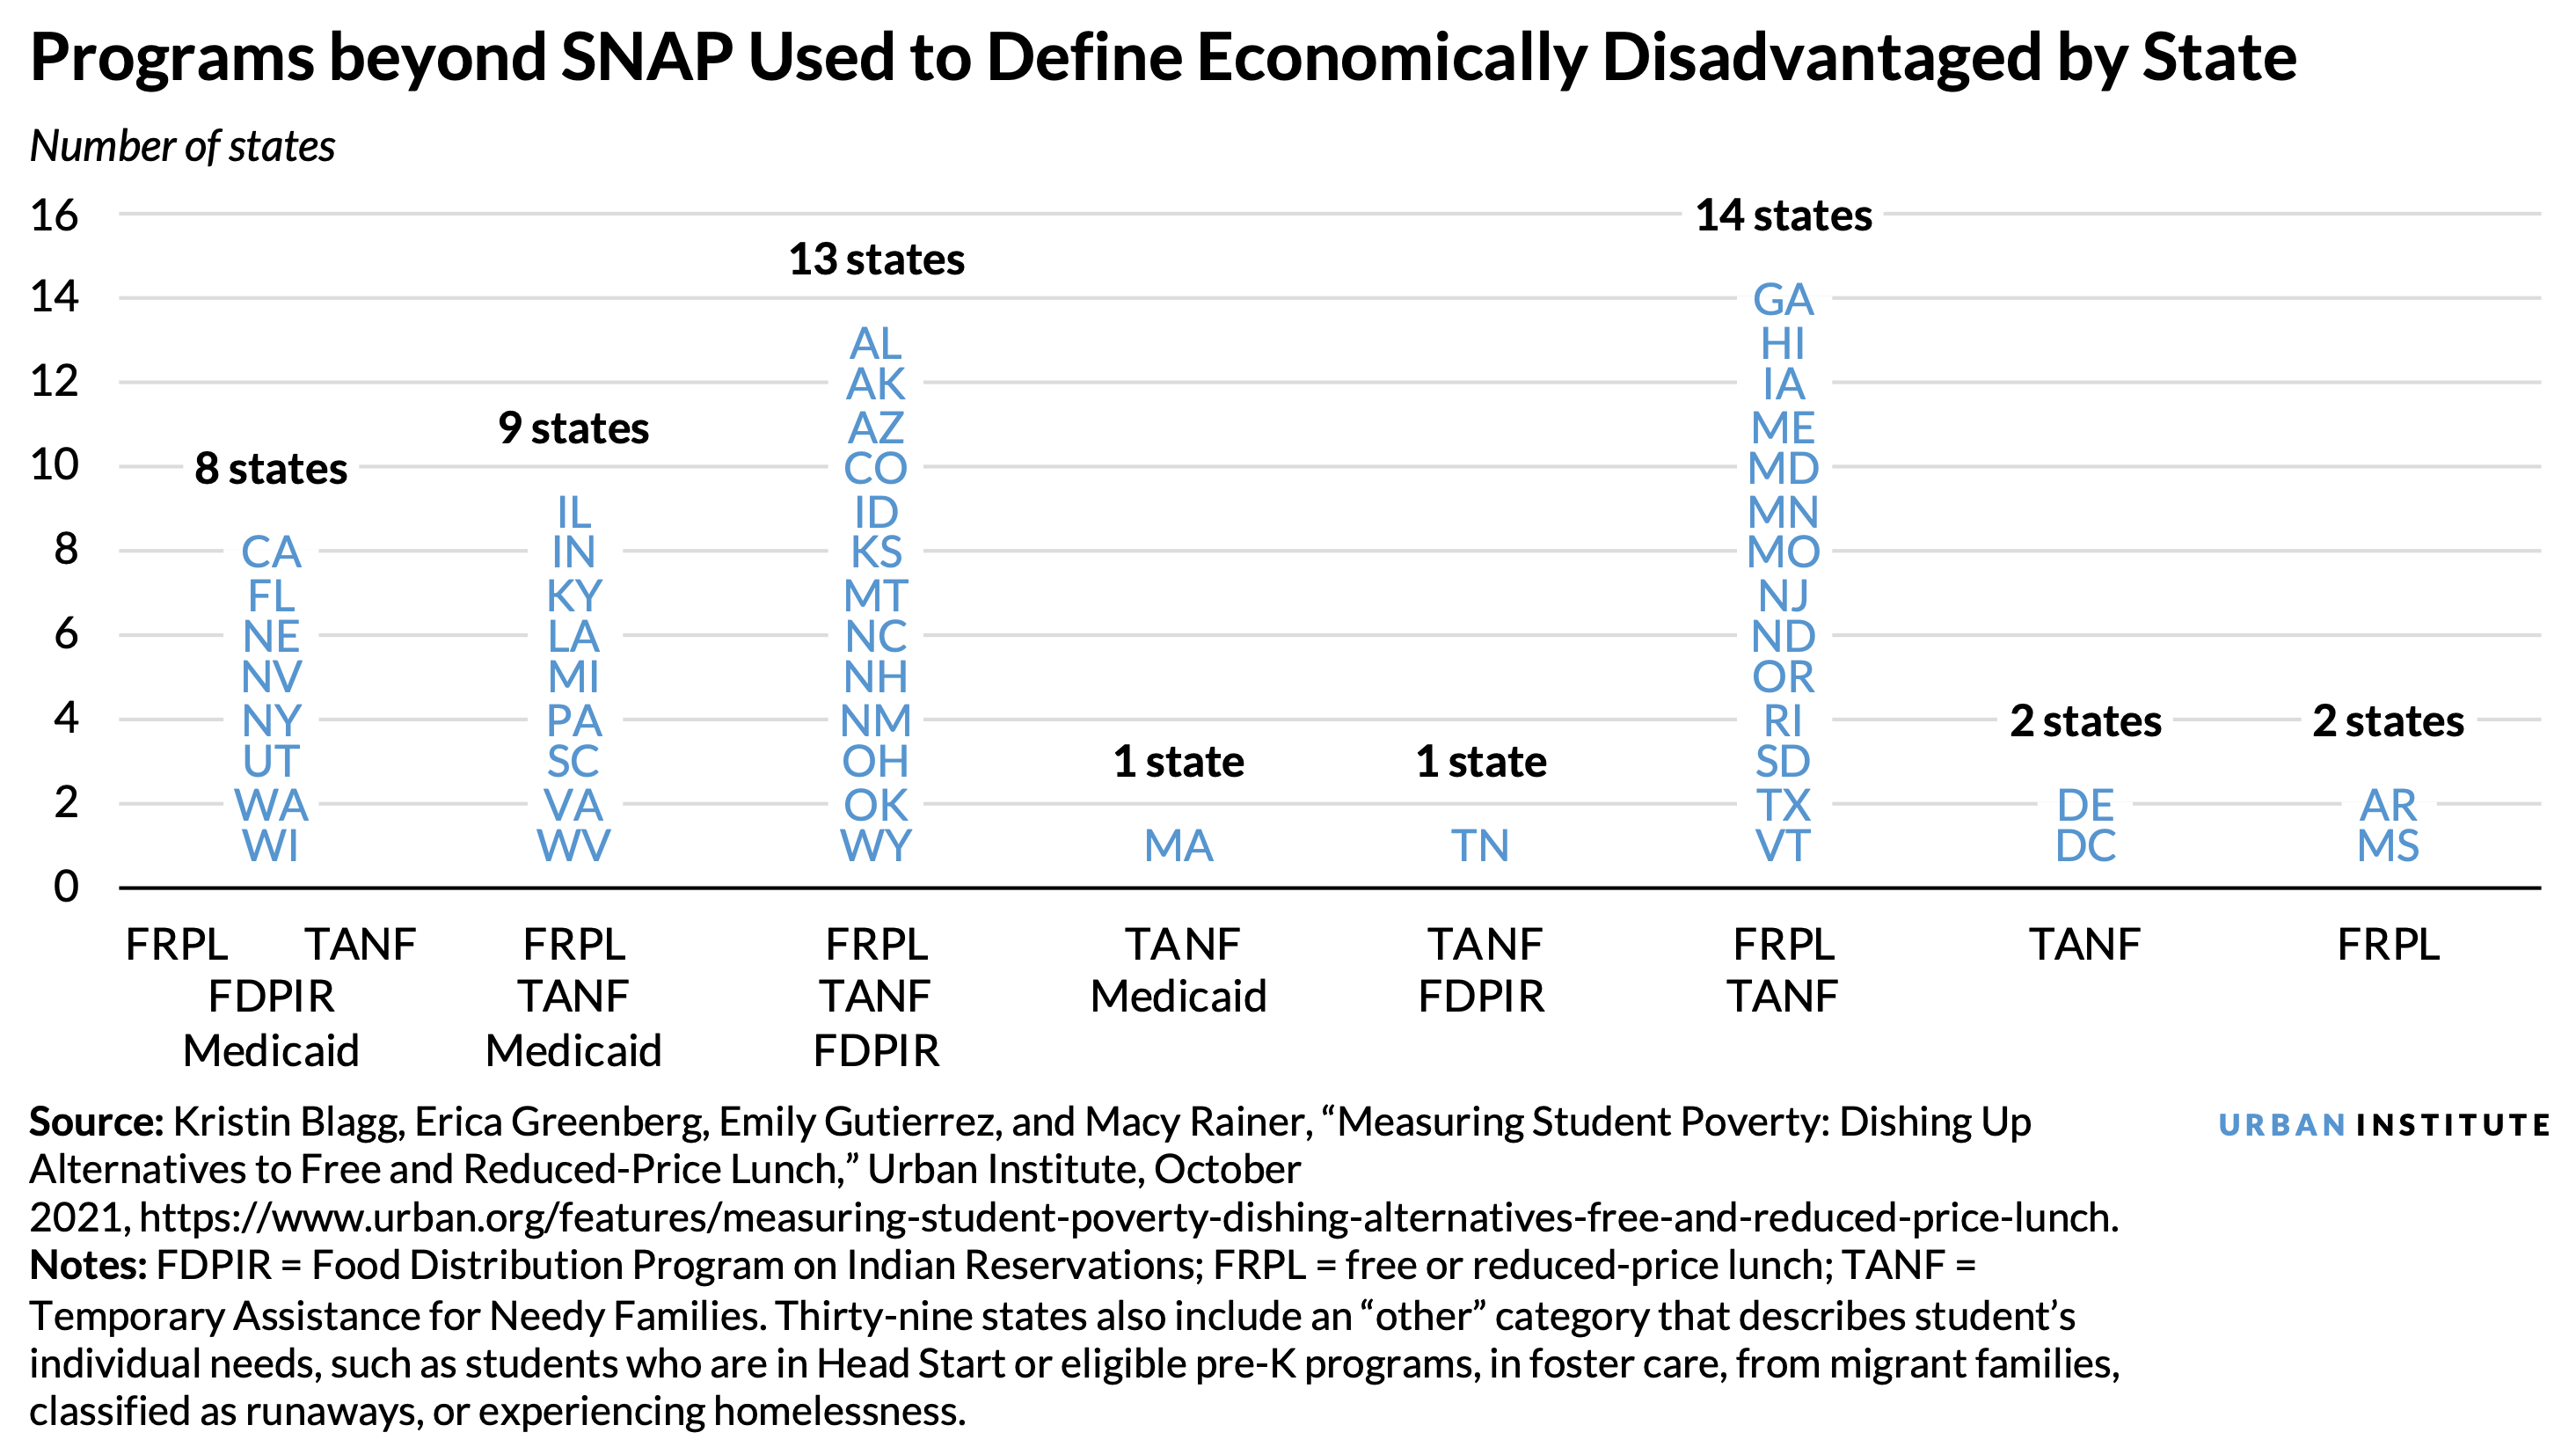 A vertical bar chart showing how states use programs beyond the Supplemental Nutrition Assistance Program to define economically disadvantaged in schools. 